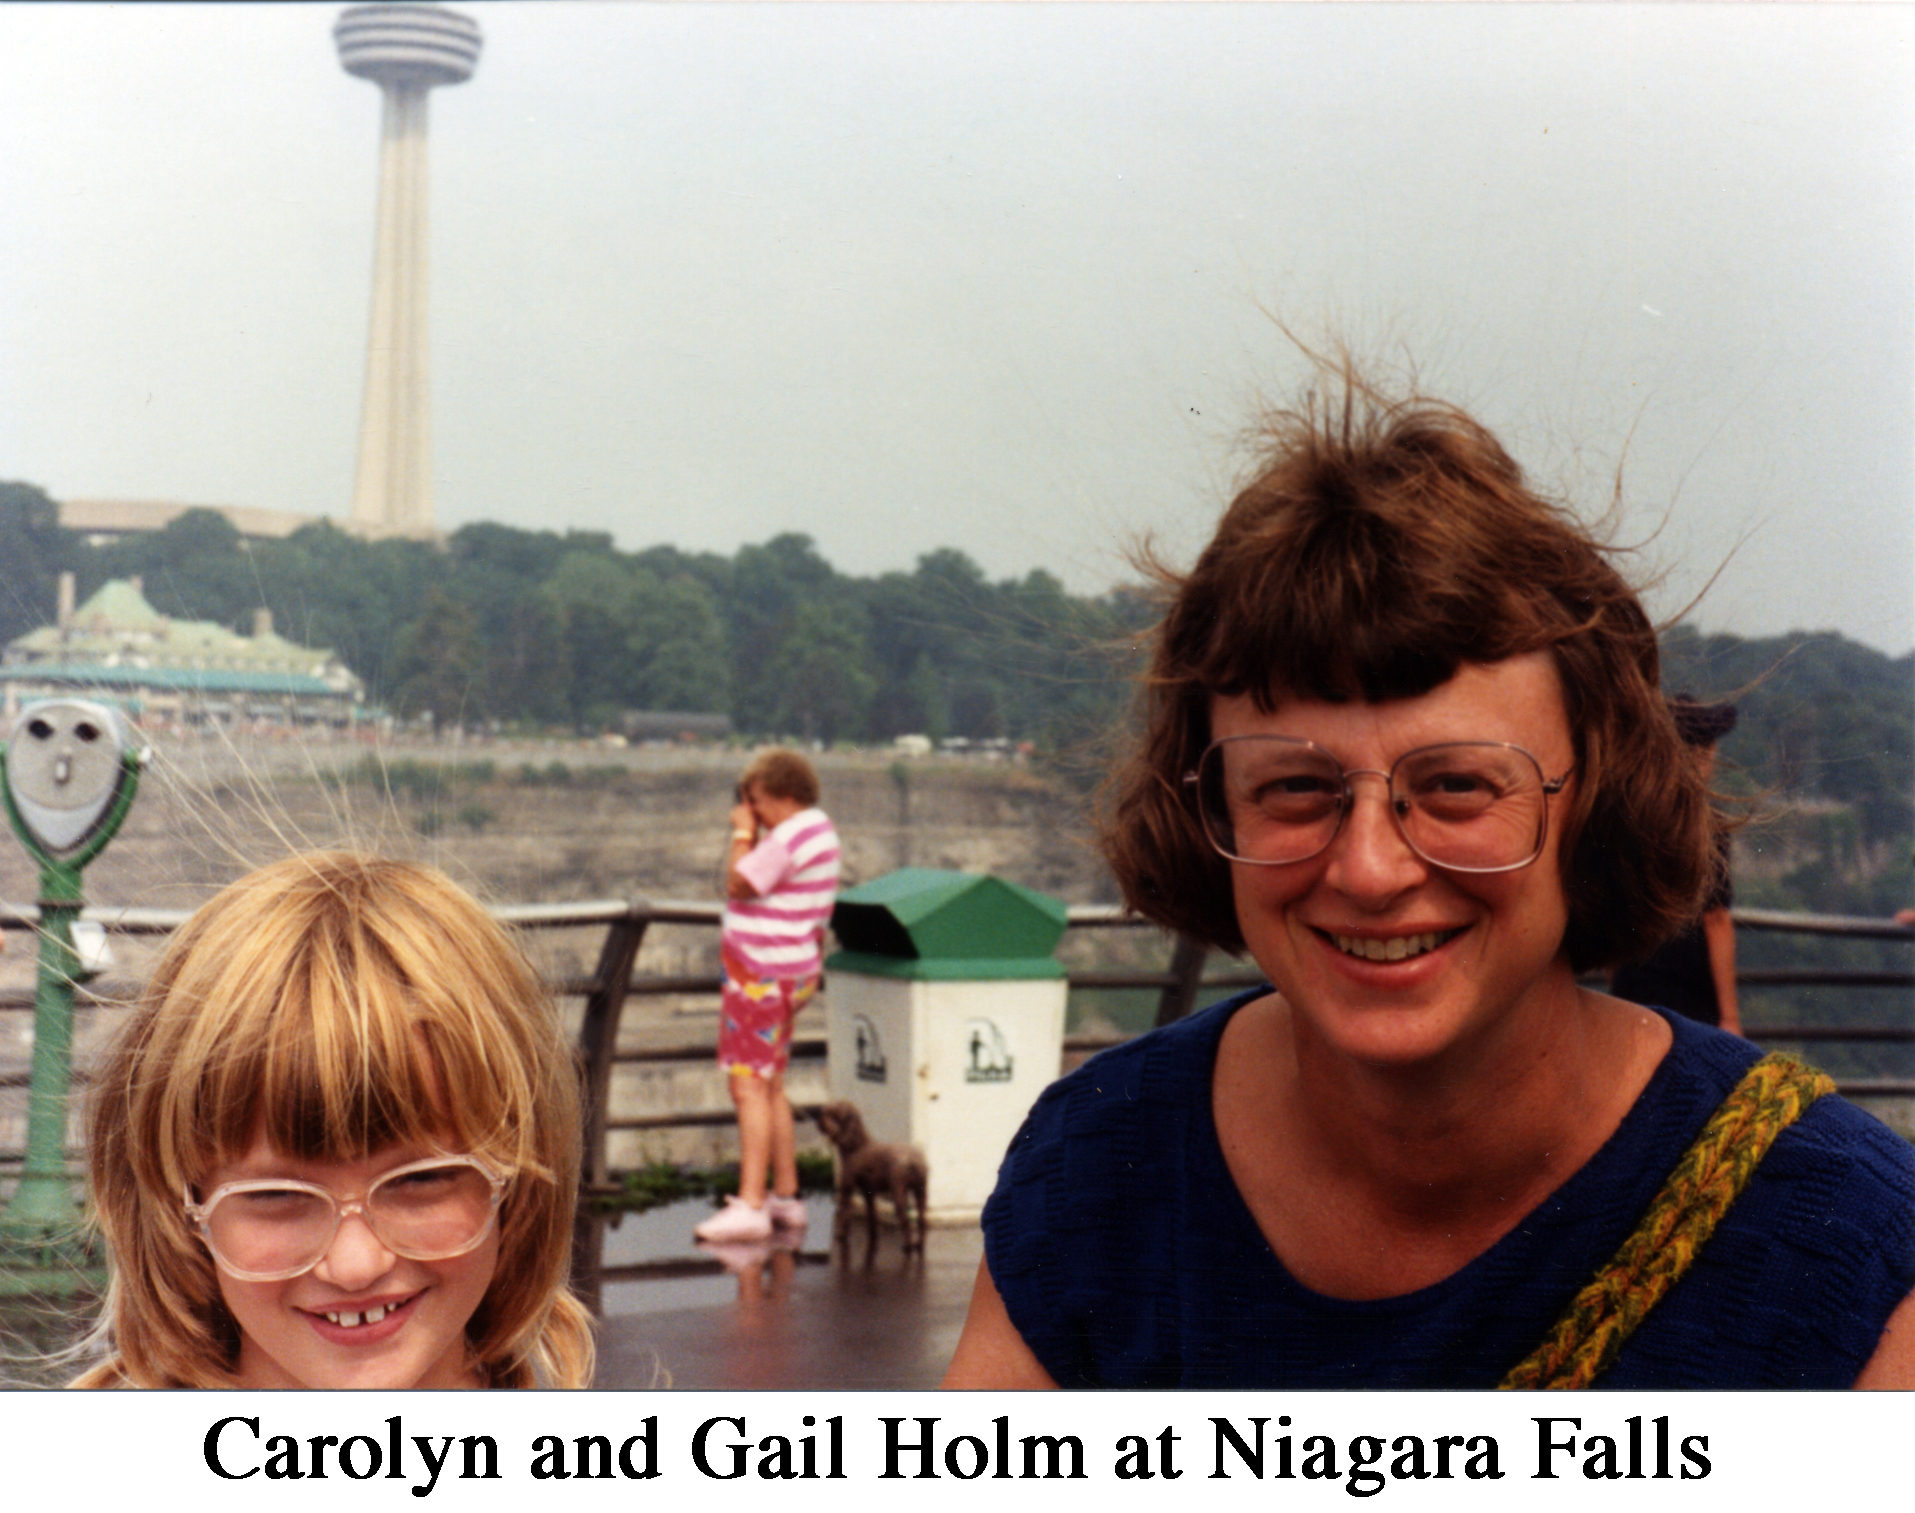 Carolyn and Gail with their hair standing on end